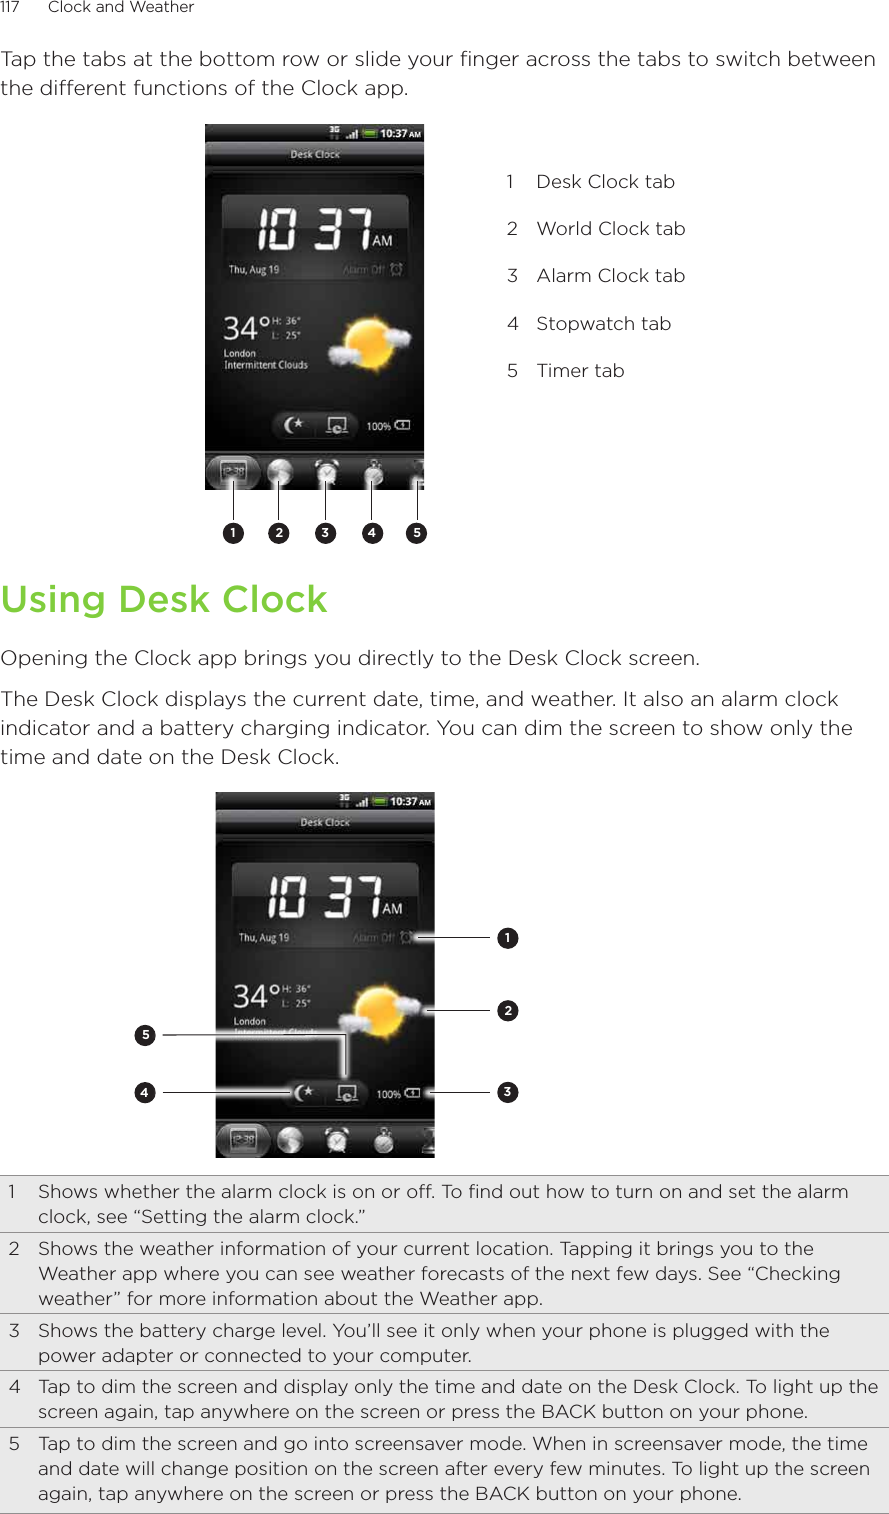 117      Clock and Weather      Tap the tabs at the bottom row or slide your finger across the tabs to switch between the different functions of the Clock app.2 3 4511  Desk Clock tab2  World Clock tab3  Alarm Clock tab4  Stopwatch tab5  Timer tabUsing Desk ClockOpening the Clock app brings you directly to the Desk Clock screen.The Desk Clock displays the current date, time, and weather. It also an alarm clock indicator and a battery charging indicator. You can dim the screen to show only the time and date on the Desk Clock.234511  Shows whether the alarm clock is on or off. To find out how to turn on and set the alarm clock, see “Setting the alarm clock.”2  Shows the weather information of your current location. Tapping it brings you to the Weather app where you can see weather forecasts of the next few days. See “Checking weather” for more information about the Weather app.3  Shows the battery charge level. You’ll see it only when your phone is plugged with the power adapter or connected to your computer.4  Tap to dim the screen and display only the time and date on the Desk Clock. To light up the screen again, tap anywhere on the screen or press the BACK button on your phone.5  Tap to dim the screen and go into screensaver mode. When in screensaver mode, the time and date will change position on the screen after every few minutes. To light up the screen again, tap anywhere on the screen or press the BACK button on your phone.